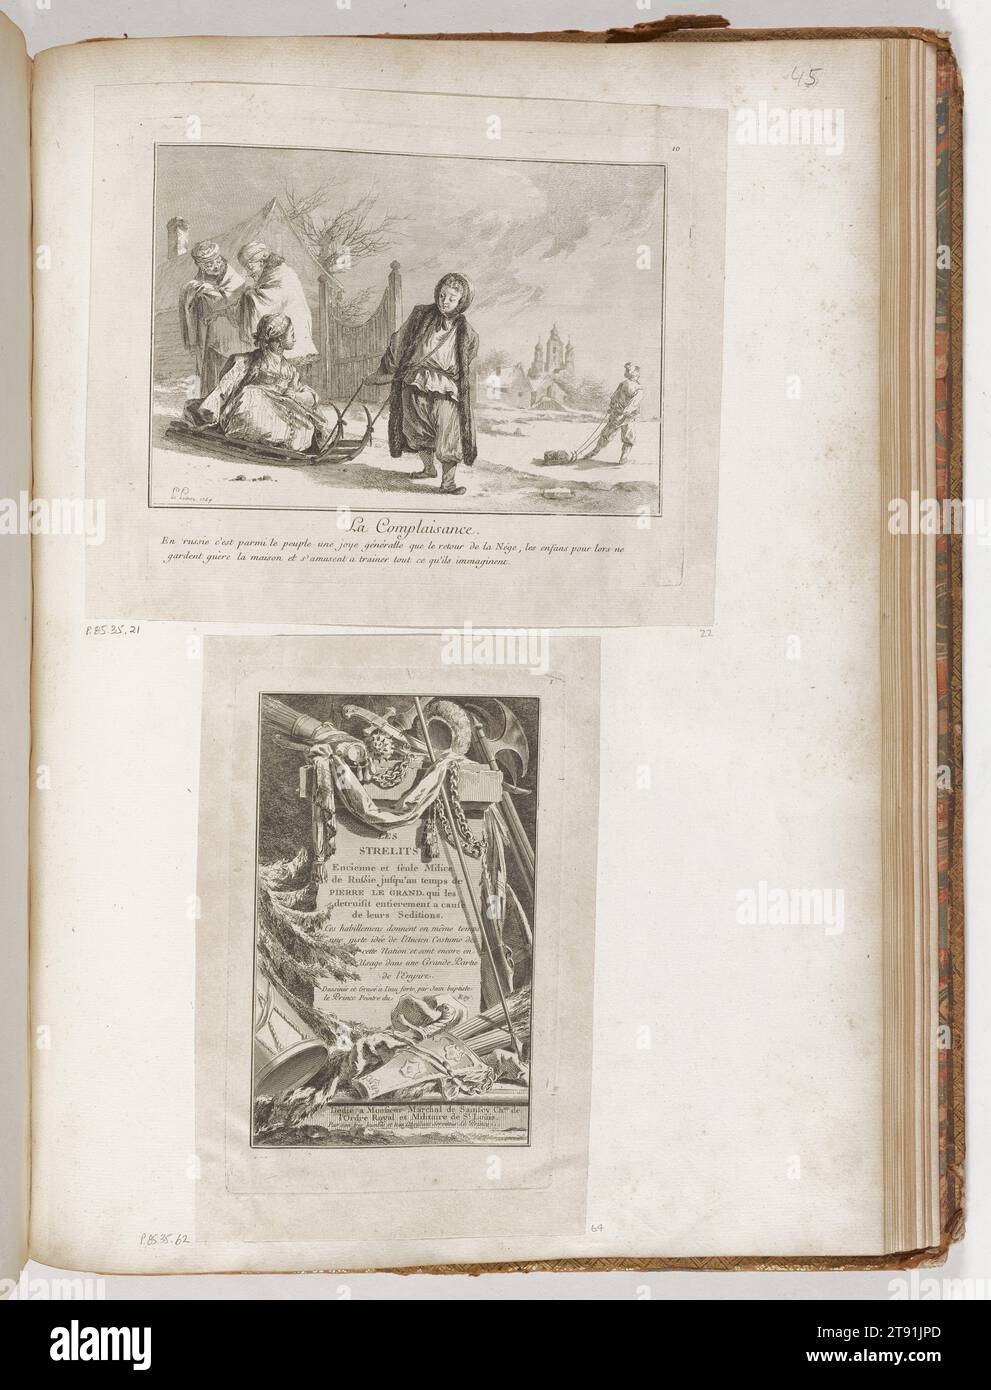 Title Page for 'Les Strelits', 1764, Jean-Baptiste Le Prince, French, 1734 - 1781, 7 7/8 x 4 7/8 in. (20 x 12.38 cm) (image)9 x 5 11/16 in. (22.86 x 14.45 cm) (plate)10 1/2 x 6 7/8 in. (26.67 x 17.46 cm) (sheet), Etching, France, 18th century Stock Photo